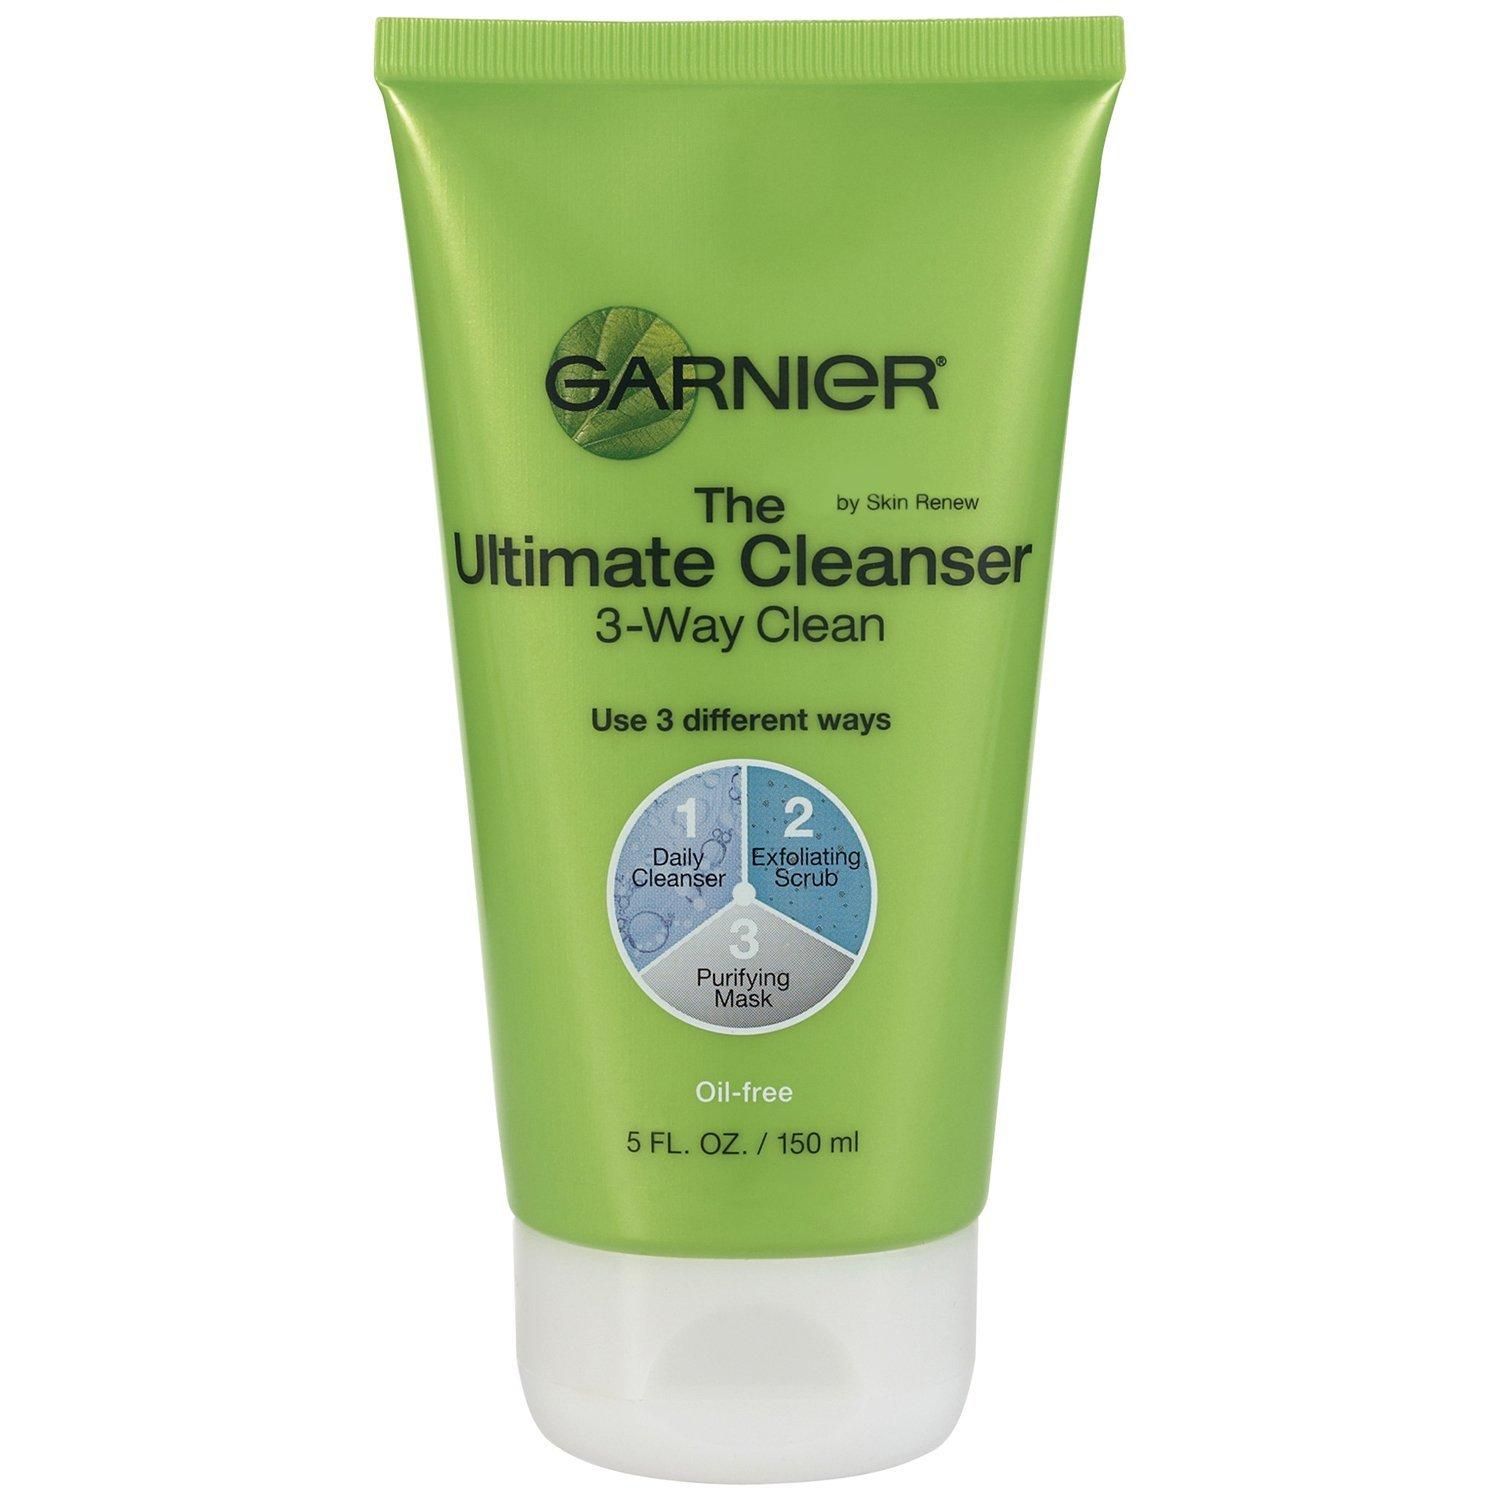 Nutritioniste The Ultimate Cleanser 3-Way Clean, Oil-free